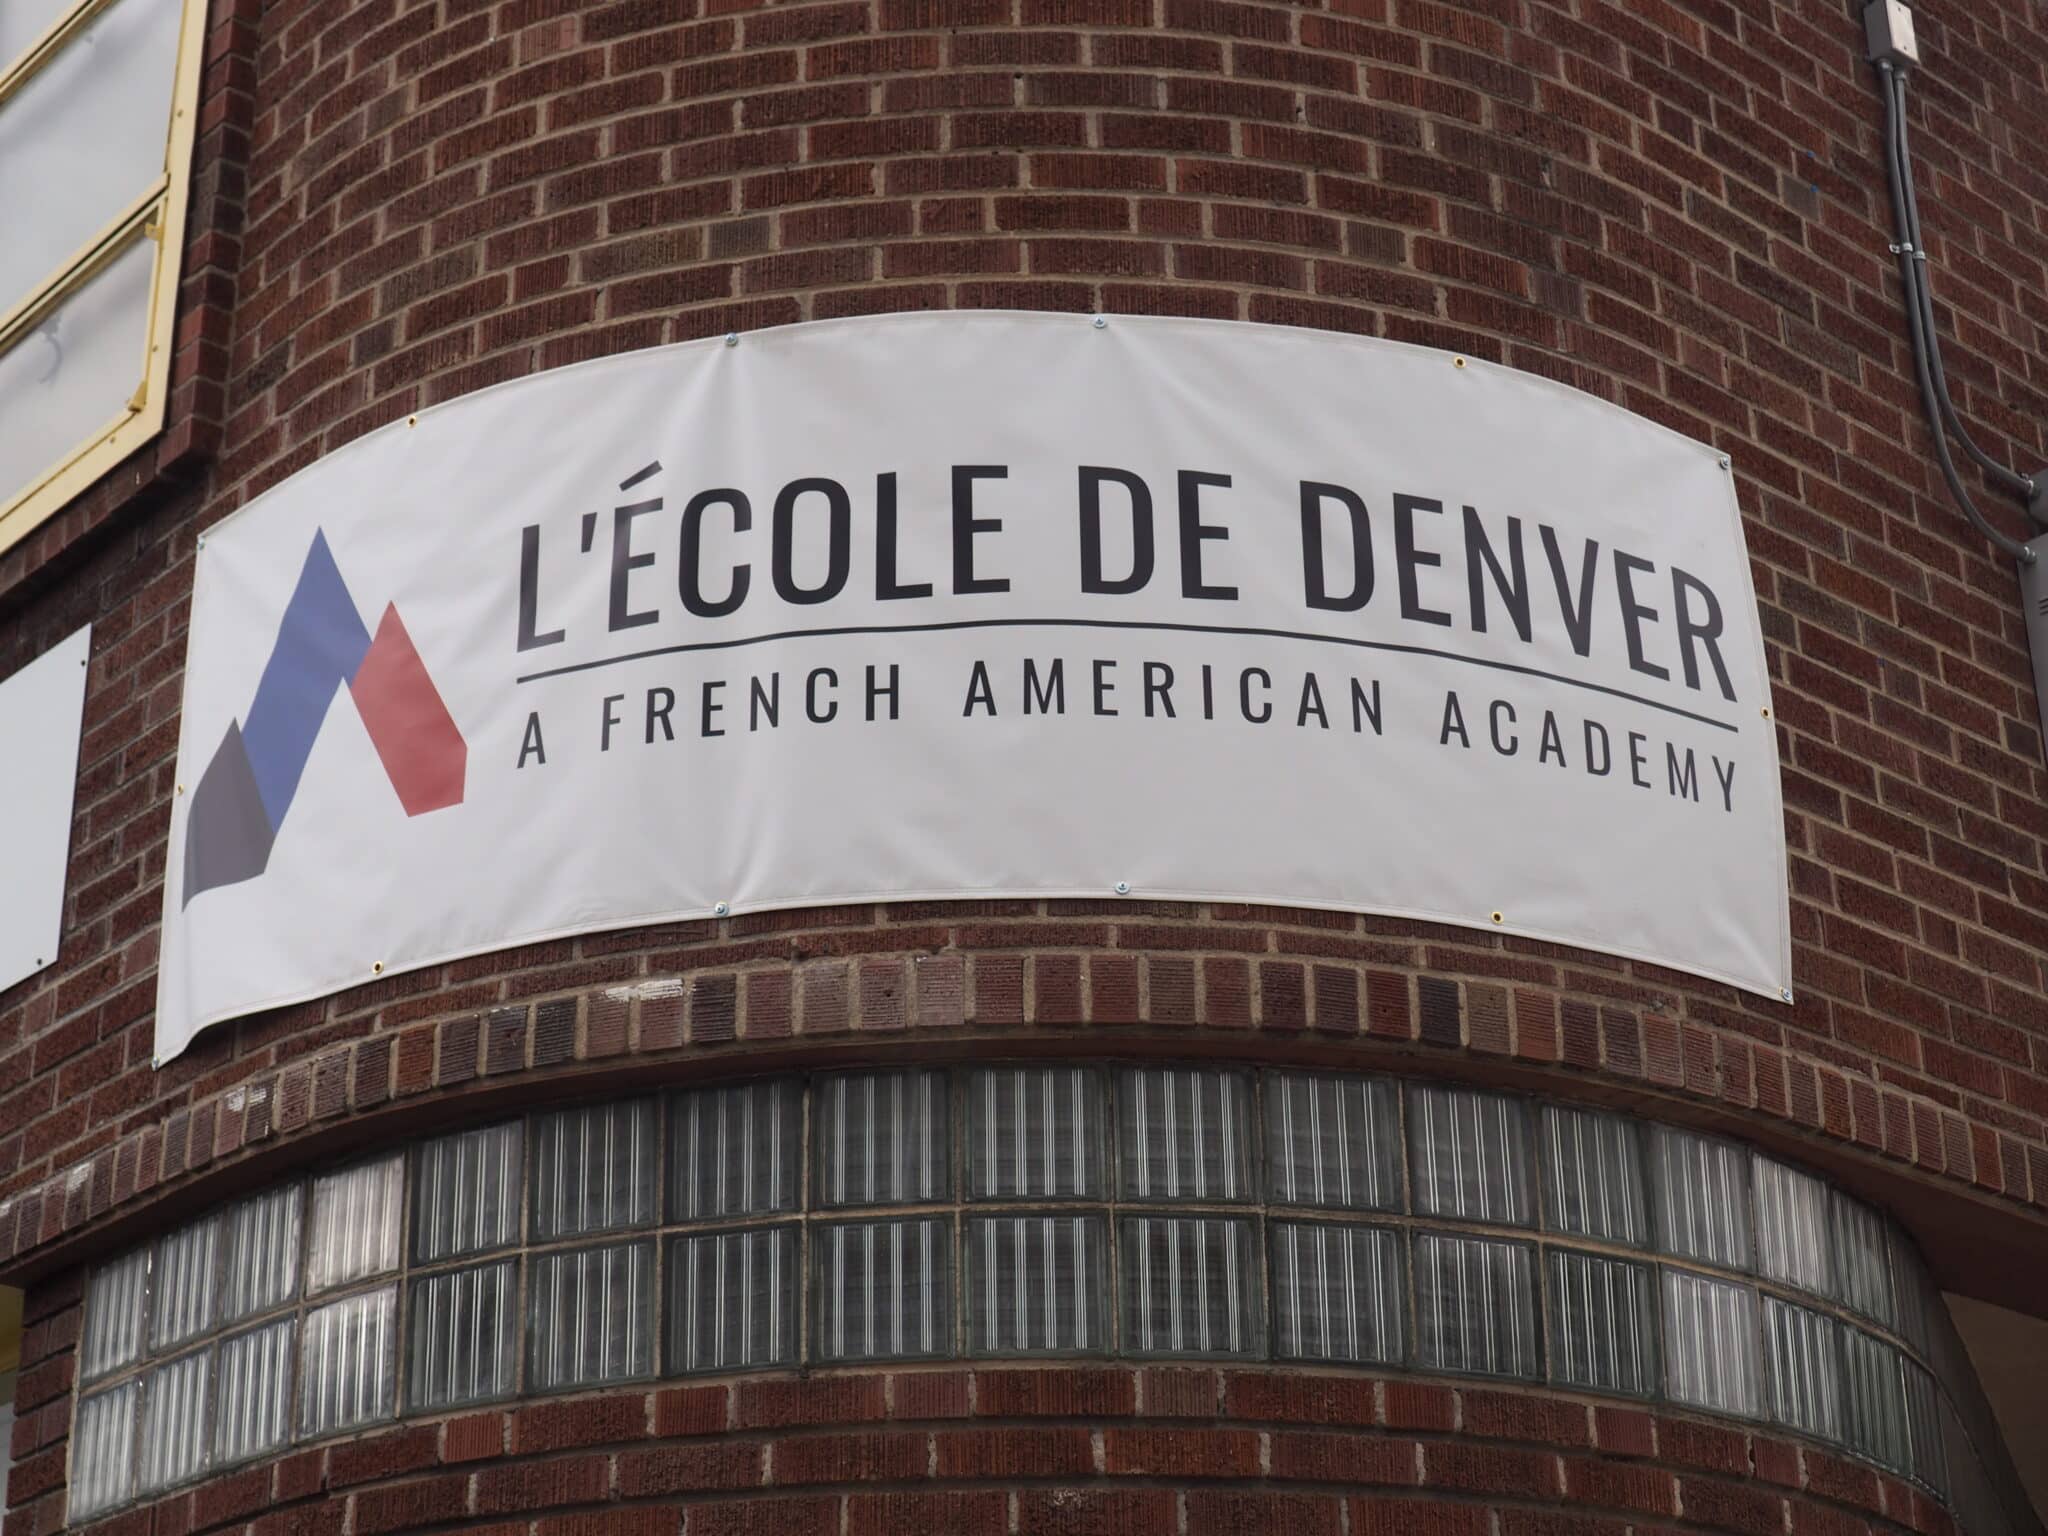 French American School of Denver moving to new location